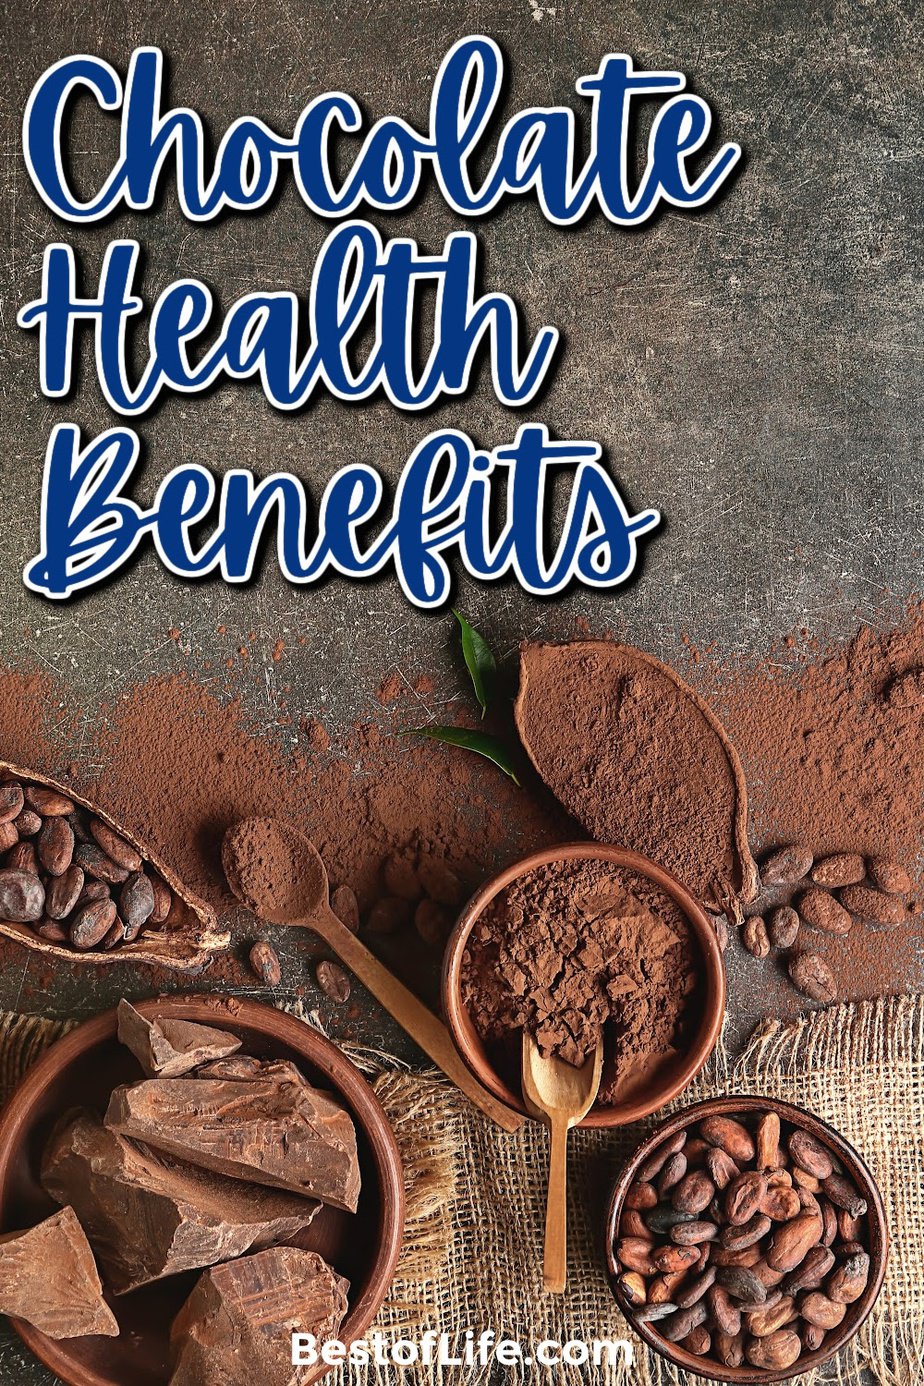 By knowing the health benefits of chocolate you can enjoy sweets in combination with a healthy lifestyle. Everything in moderation, right? Tips for Healthy Living | Healthy Living Ideas | Nutrition Tips | Tips for a Healthy Diet | Healthy Diet Ideas #chocolate #healthyliving via @thebestoflife